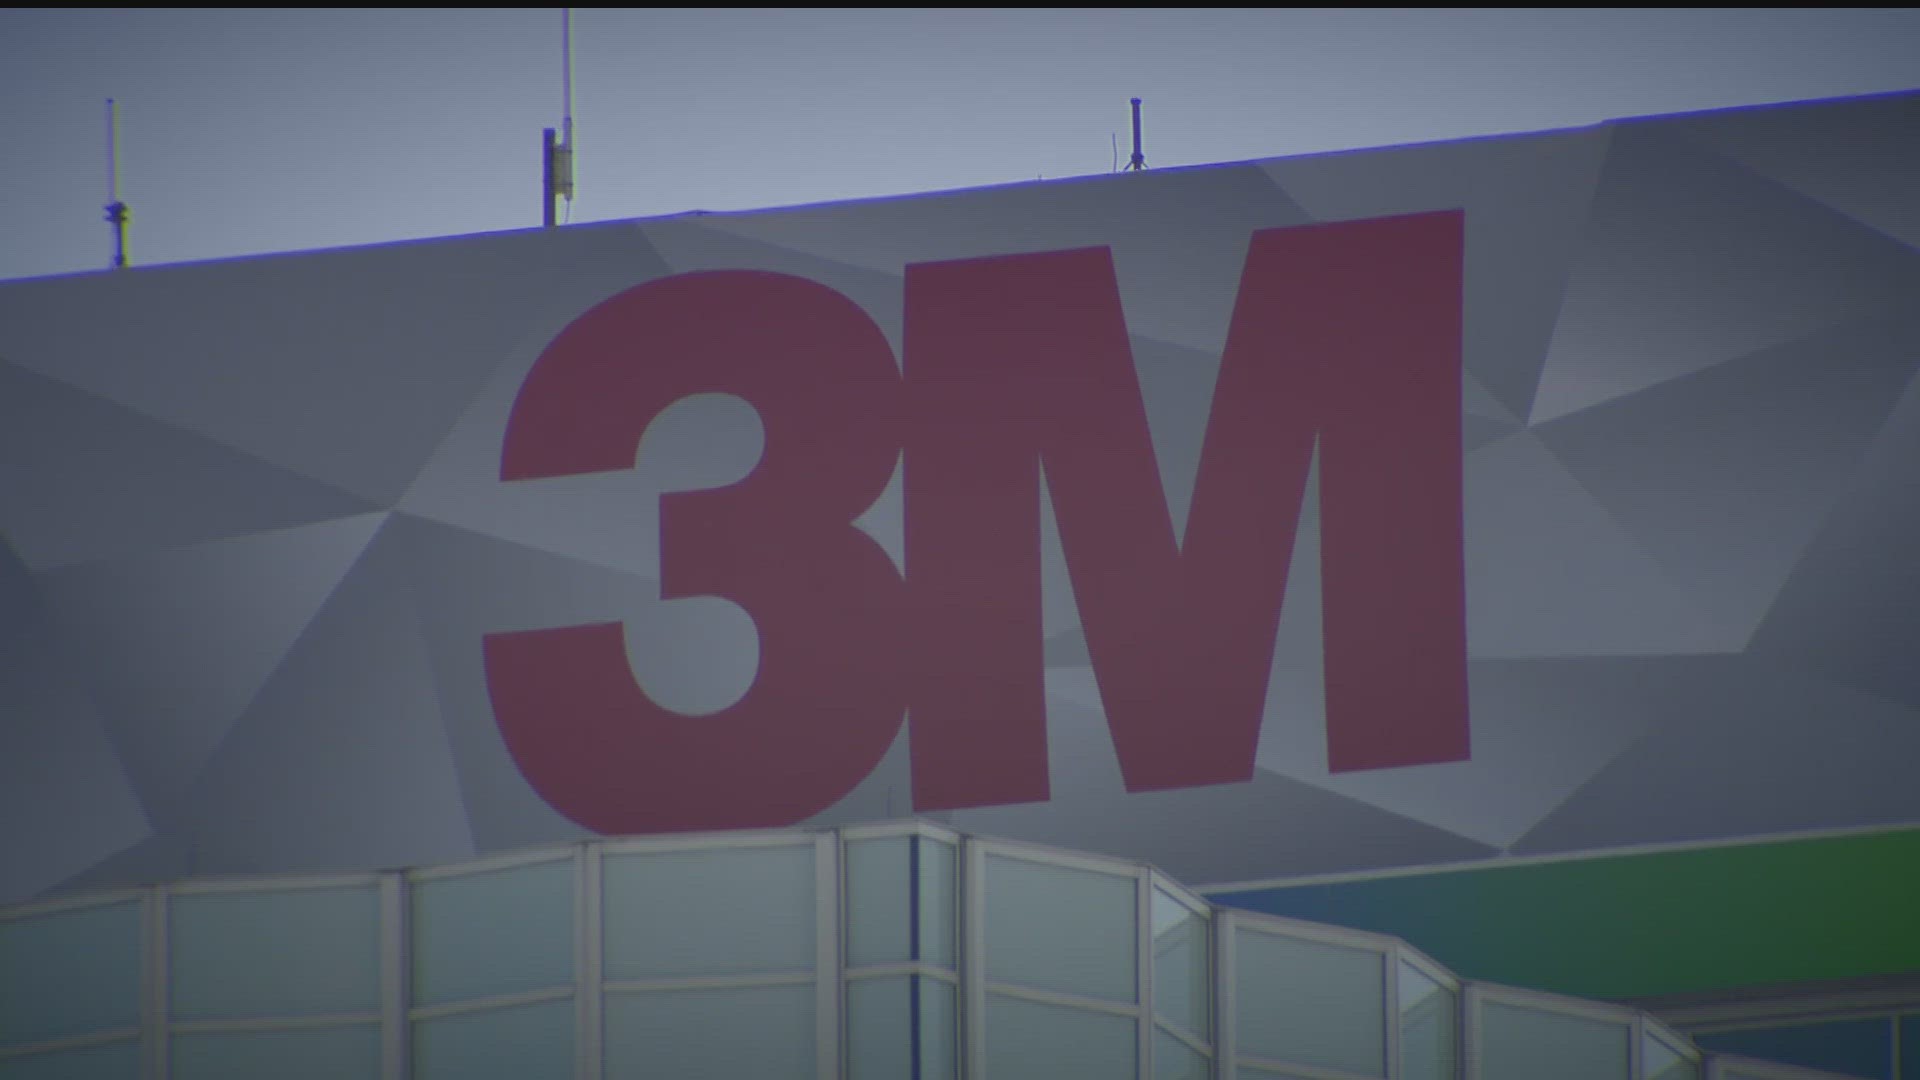 The job cuts, part of 3M's global layoff plan, are set to begin on June 30, 2023.